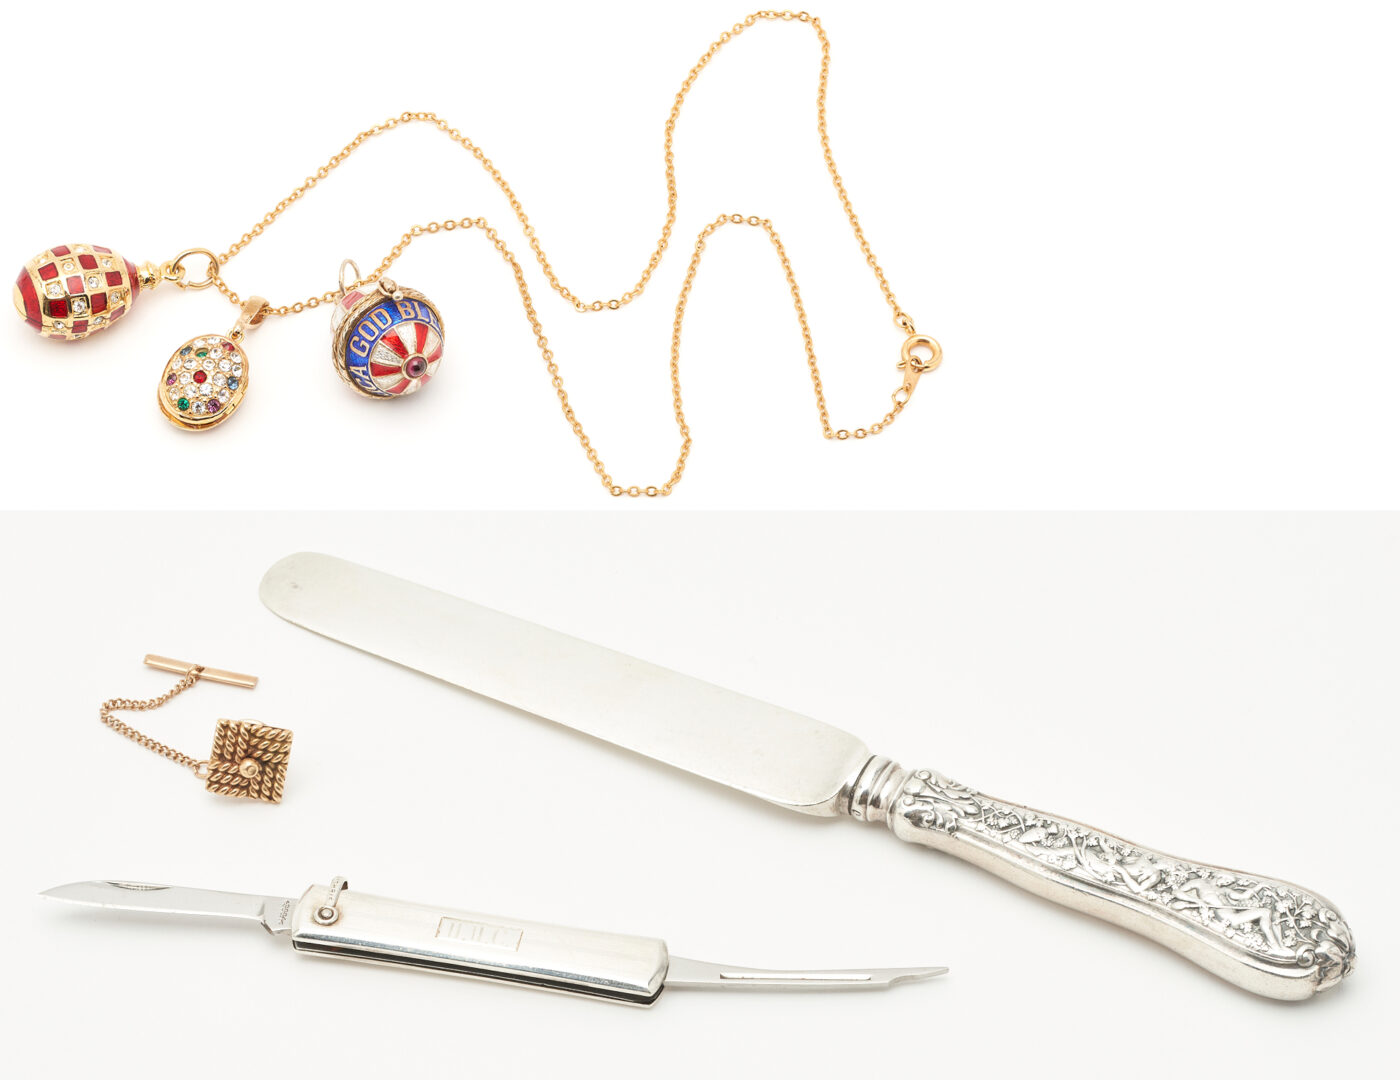 Lot 173: 2 Tiffany & Co Knives & 14K Tie Tack + 3 Faberge Style Egg Charms